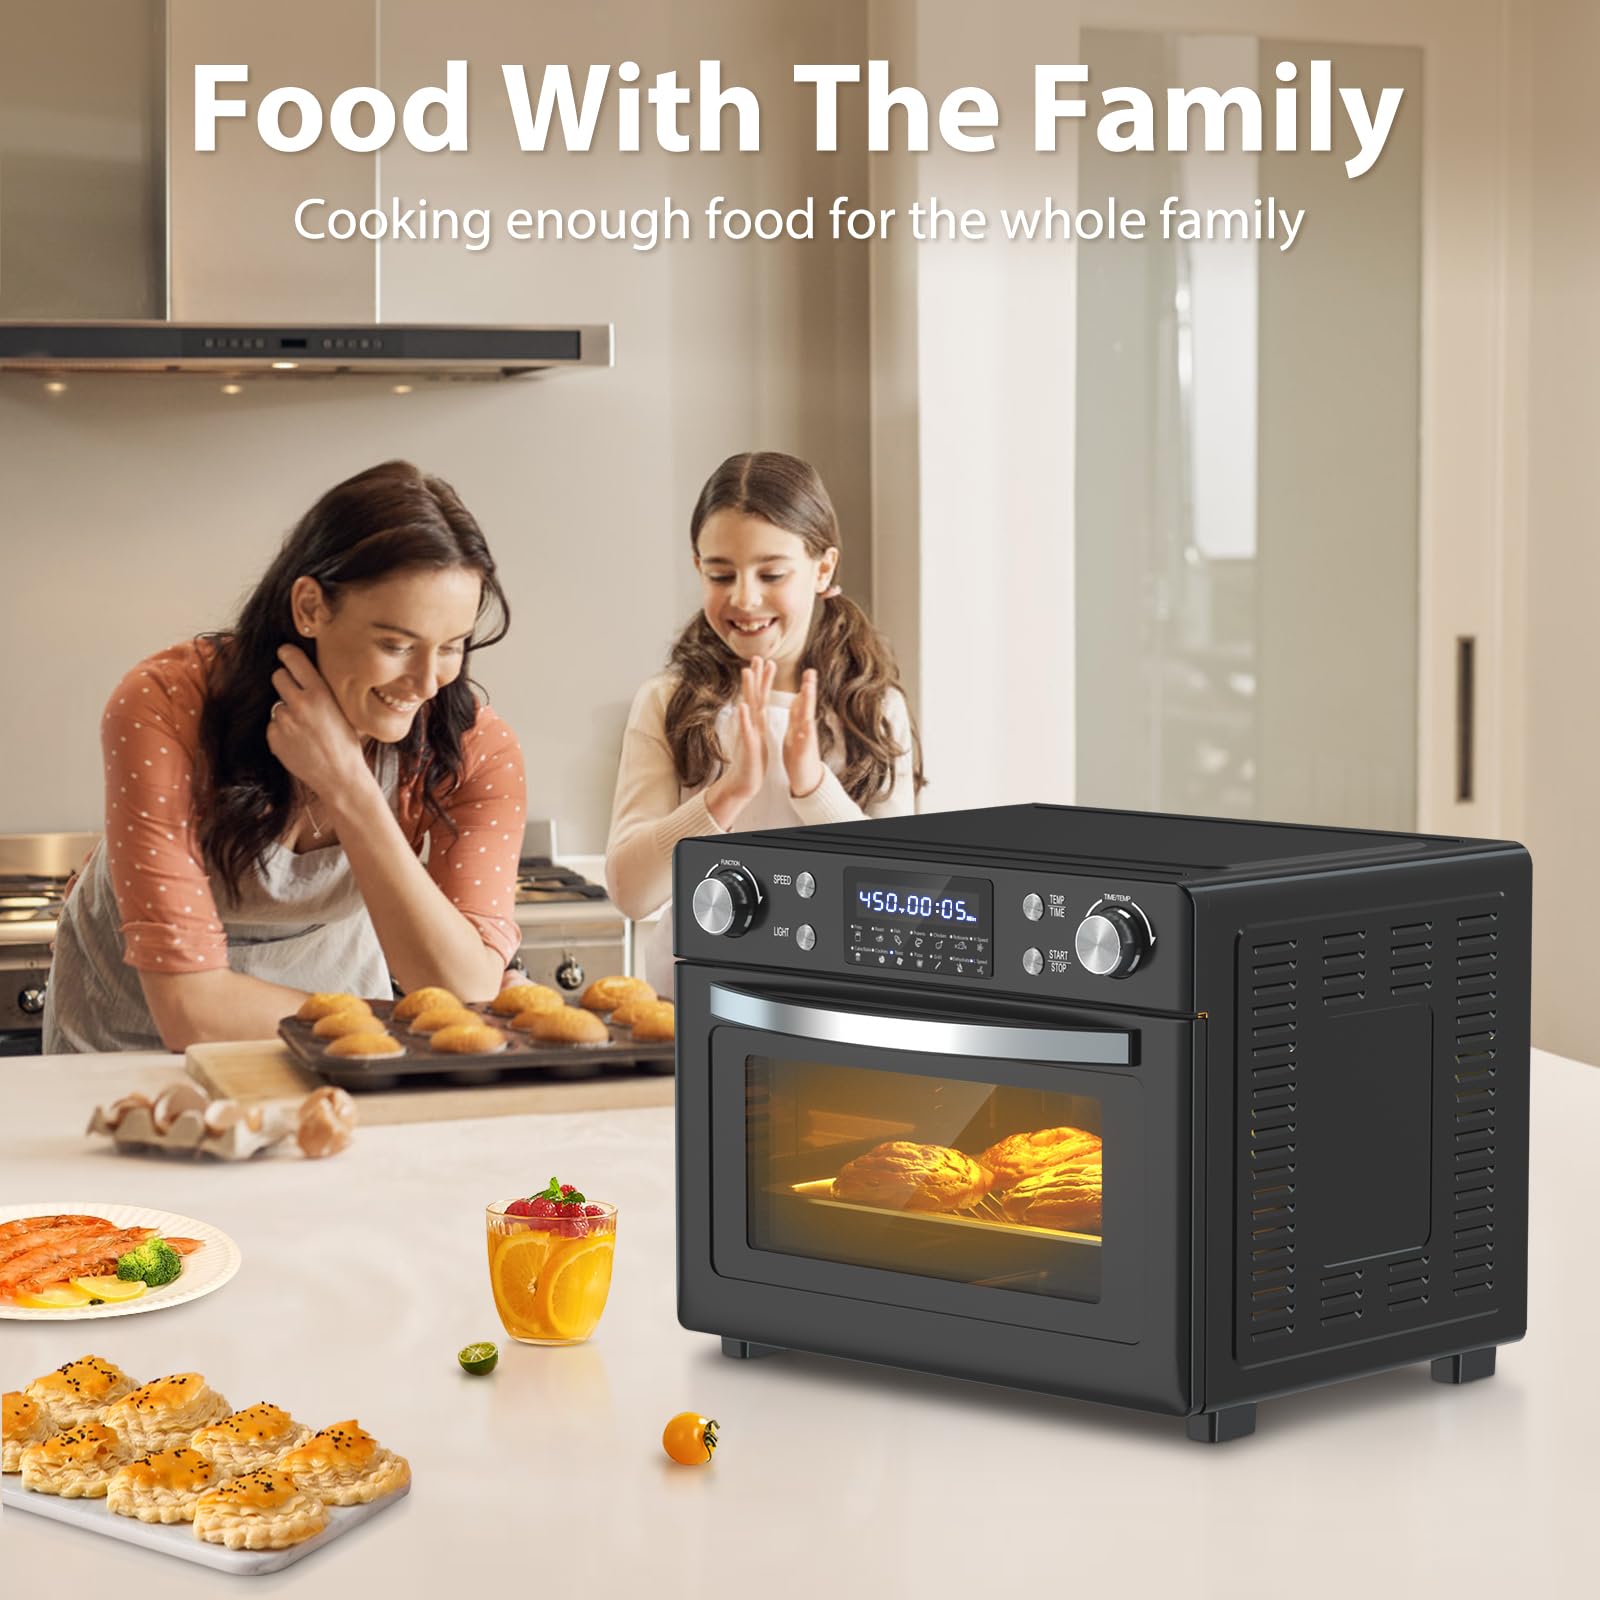 26 inch Toaster Oven Freestanding and Wall Mounted, Toaster Oven with Remote Control & Touch Screen, Adjustable Flame Color and Speed, Log/Crystal Options